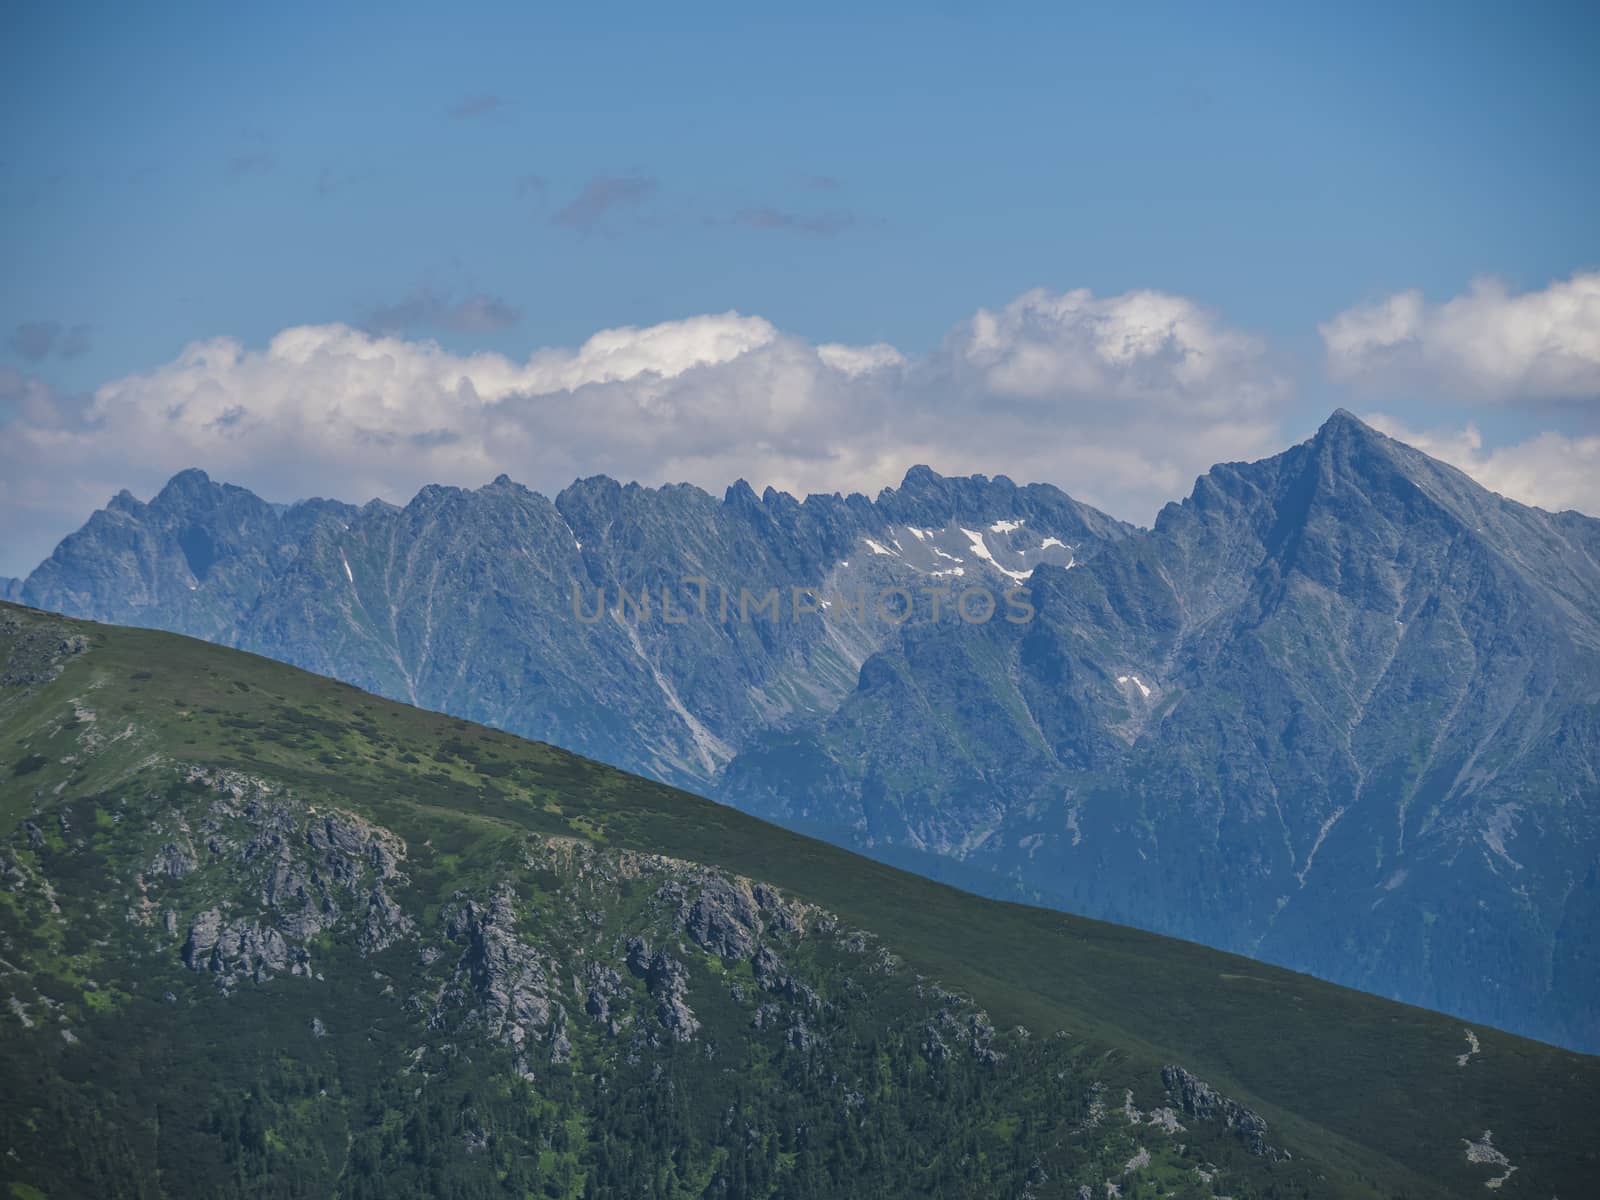 Mountain landscape of Western Tatra mountains or Rohace with view on high tatras with Krivan peak from hiking trail on Baranec. Sharp green grassy rocky mountain peaks with scrub pine and alpine flower meadow. Summer blue sky background.